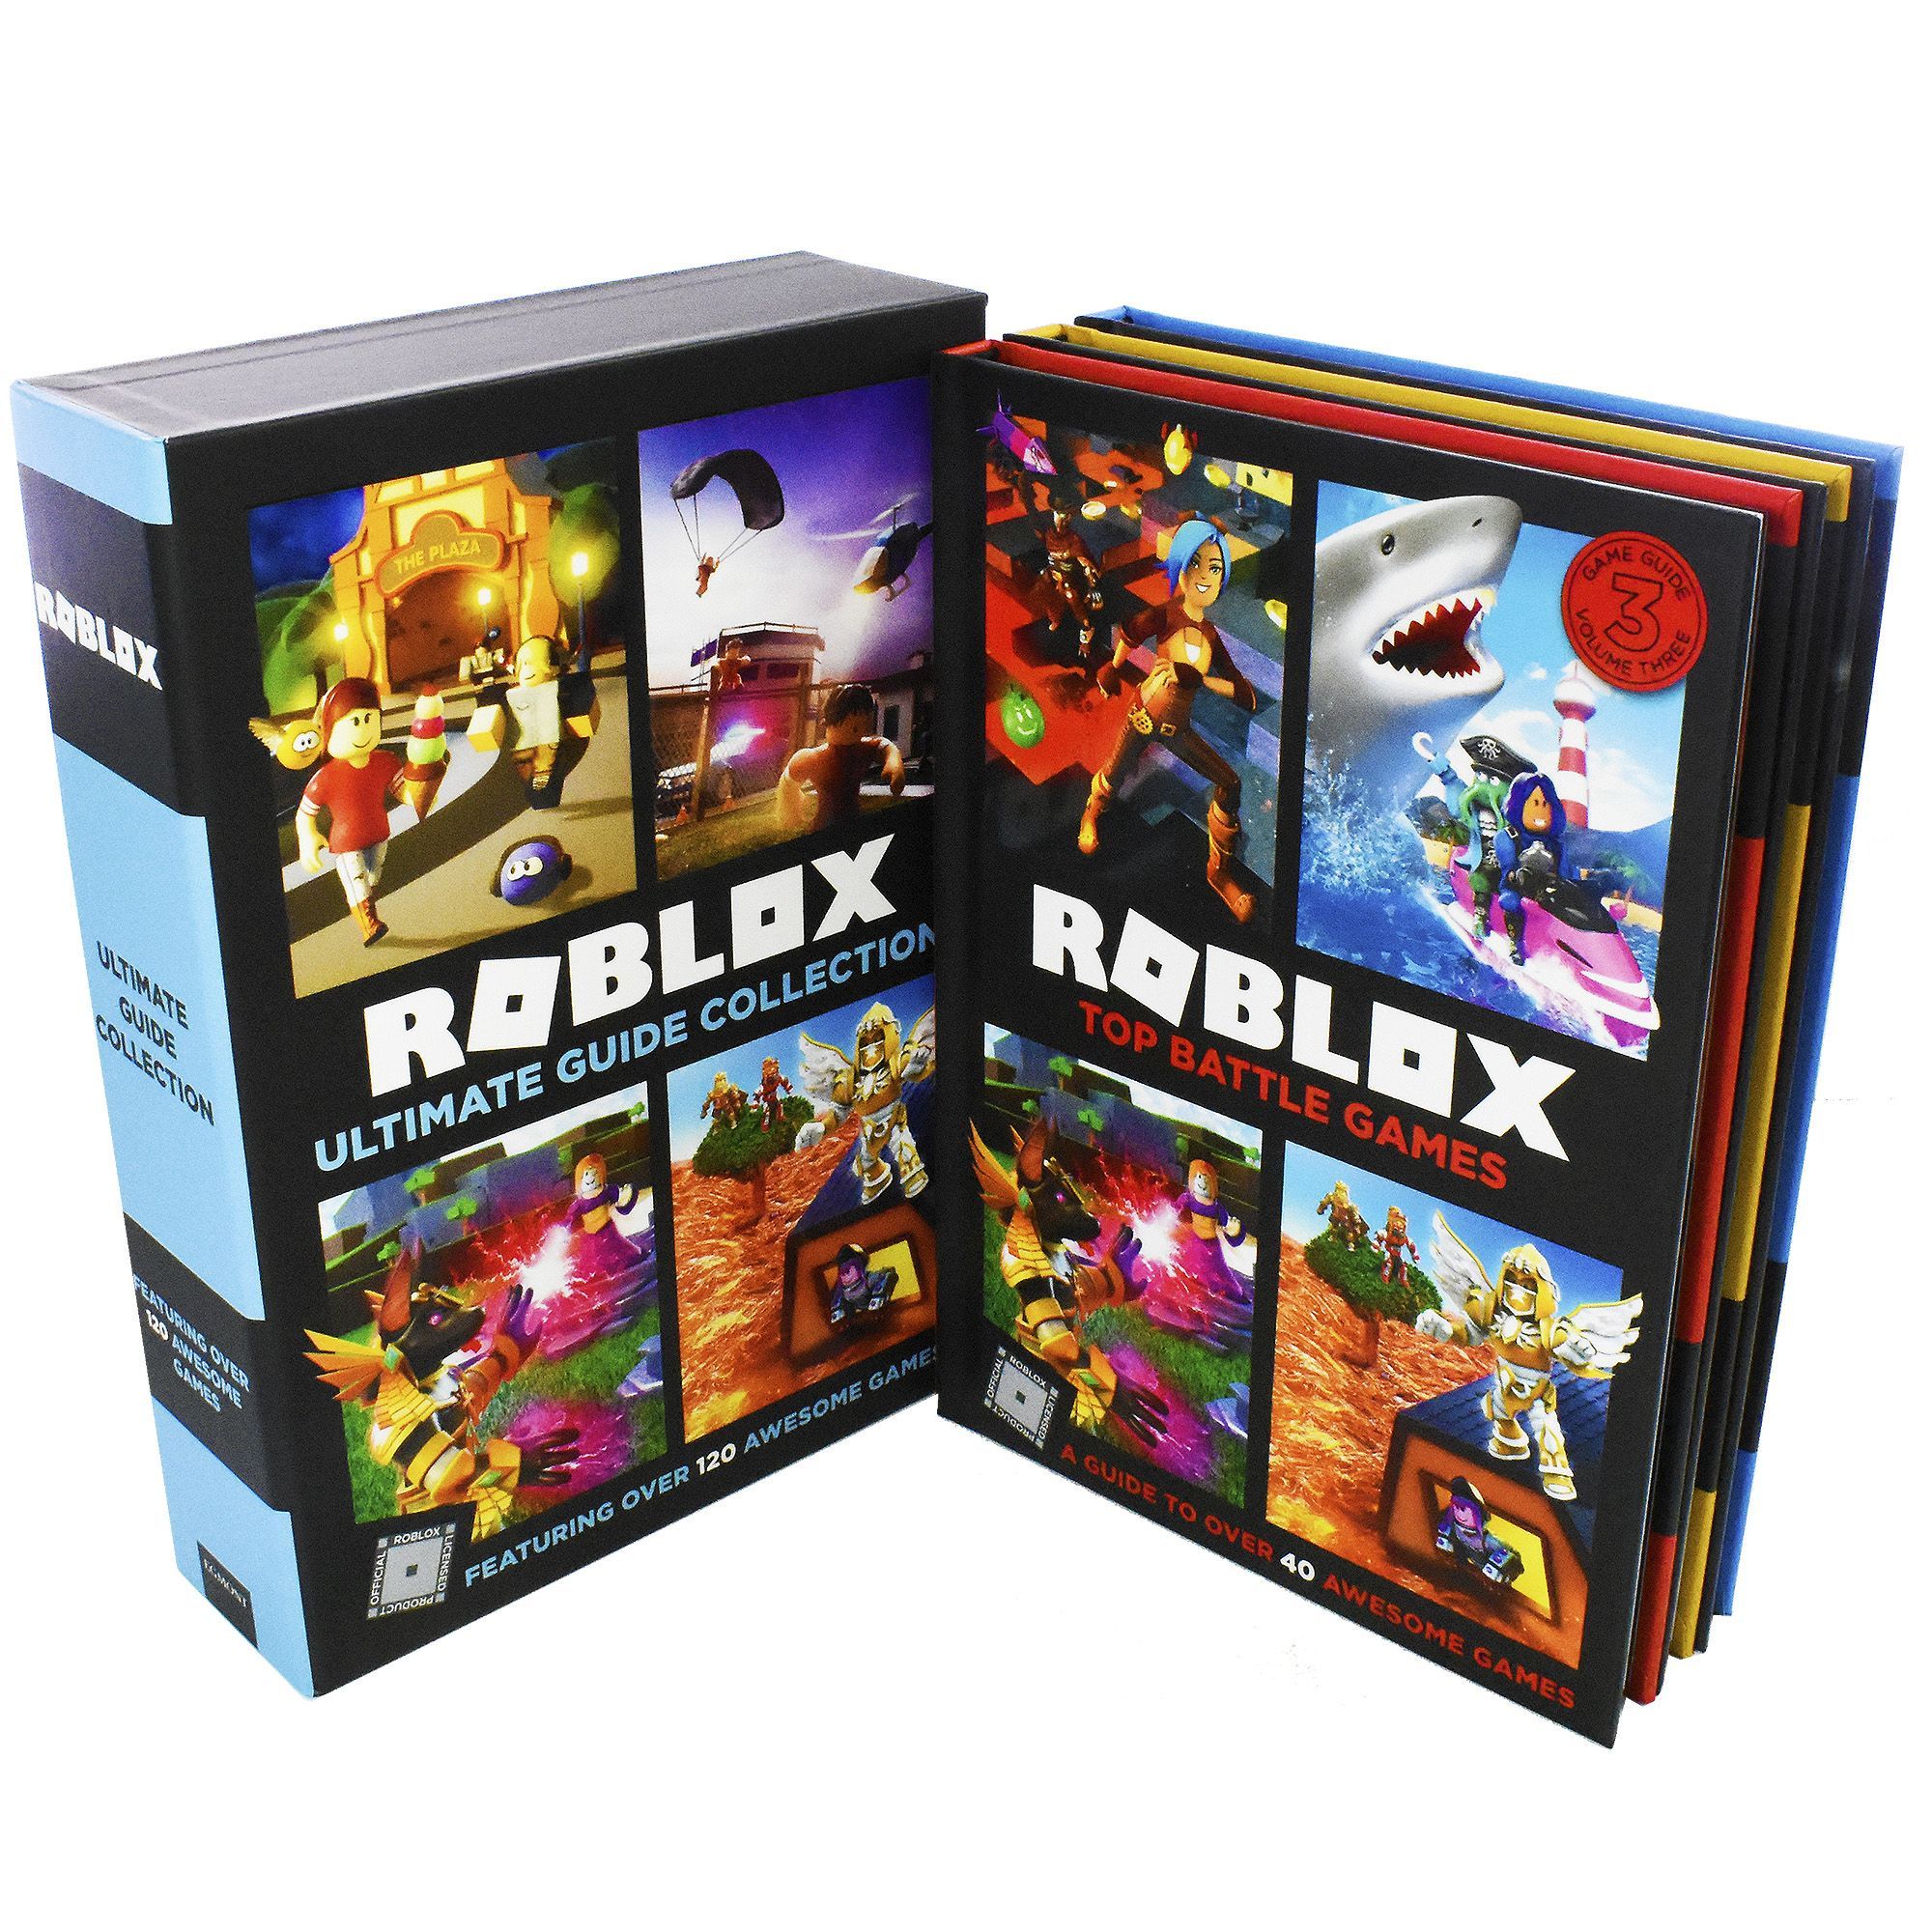 Roblox Ultimate Guide 3 Books Children Collection Hardback By David Jagneaux St Stephens Books - how to refund a pass on roblox